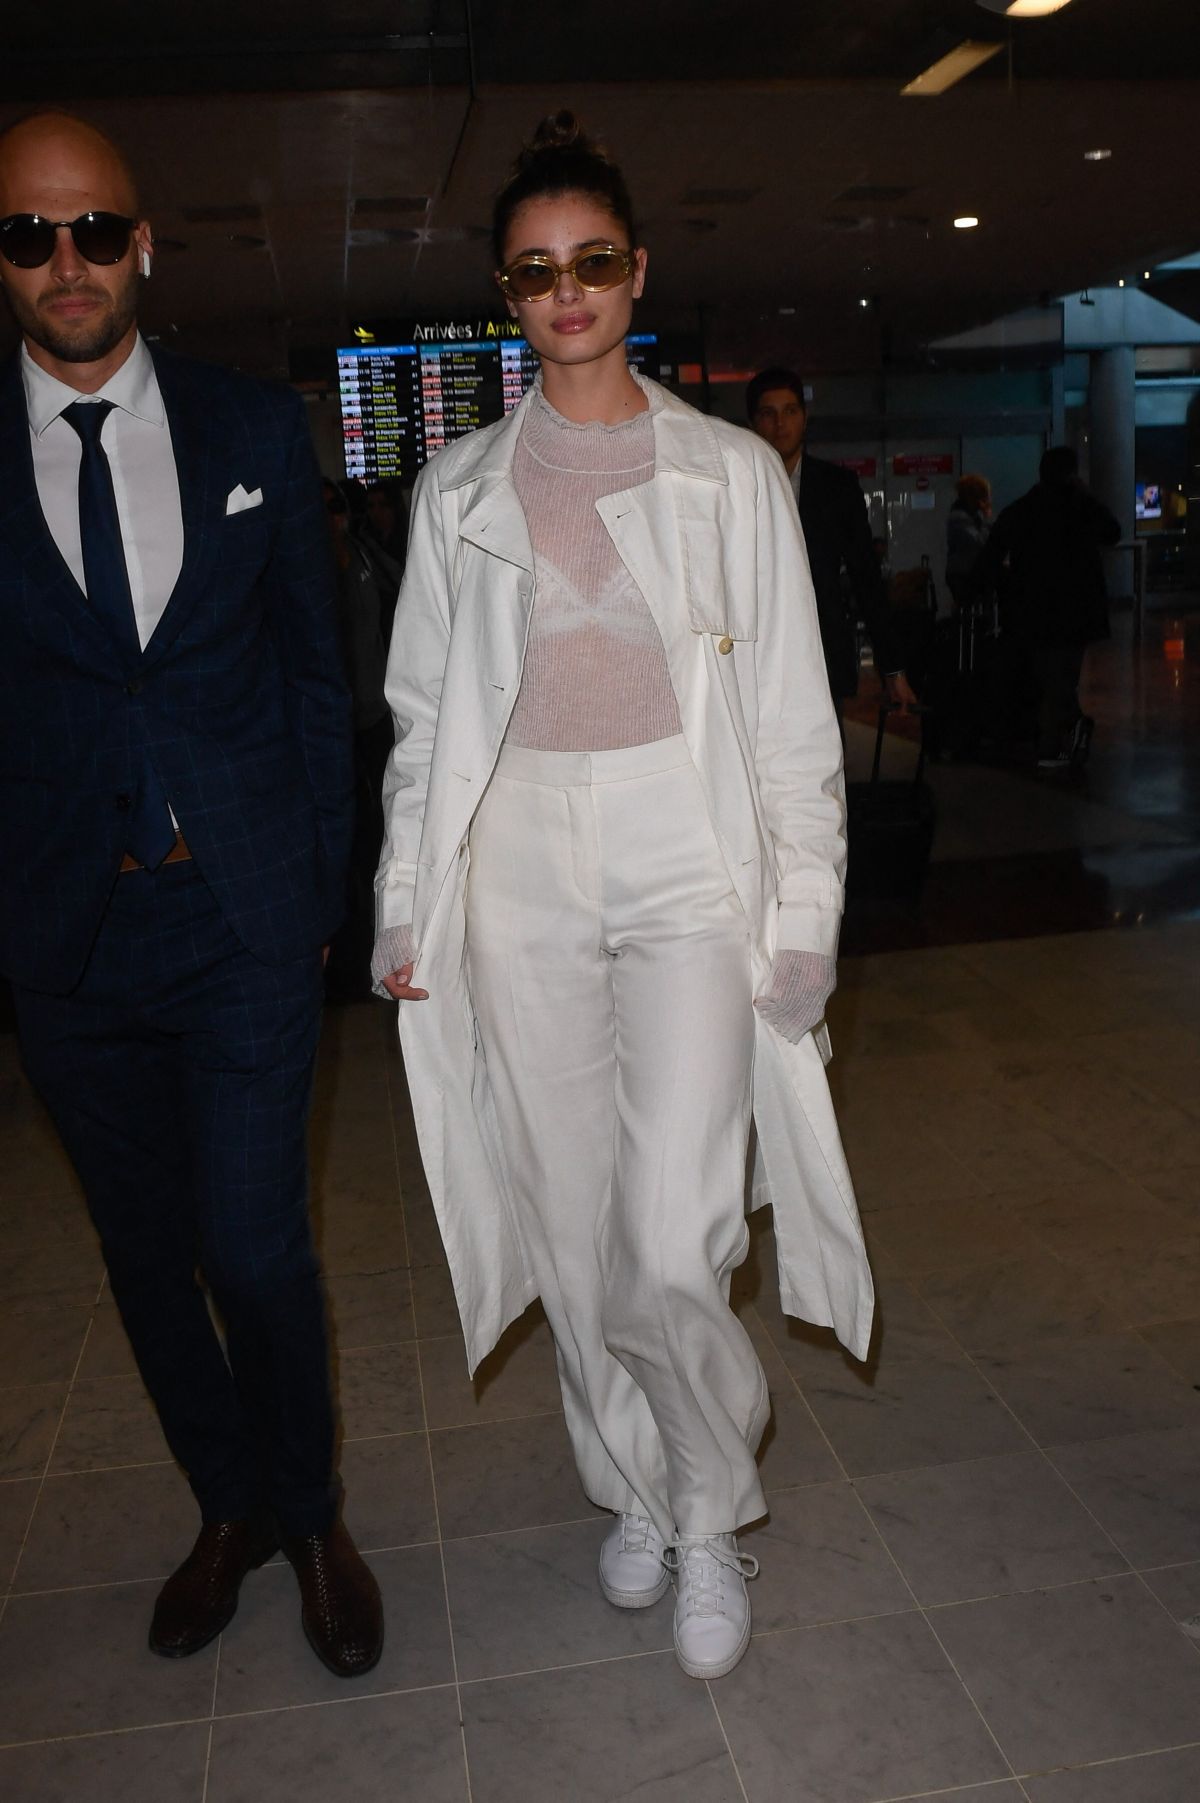 taylor-hill-arrives-at-nice-airport-05-16-2019-2.jpg